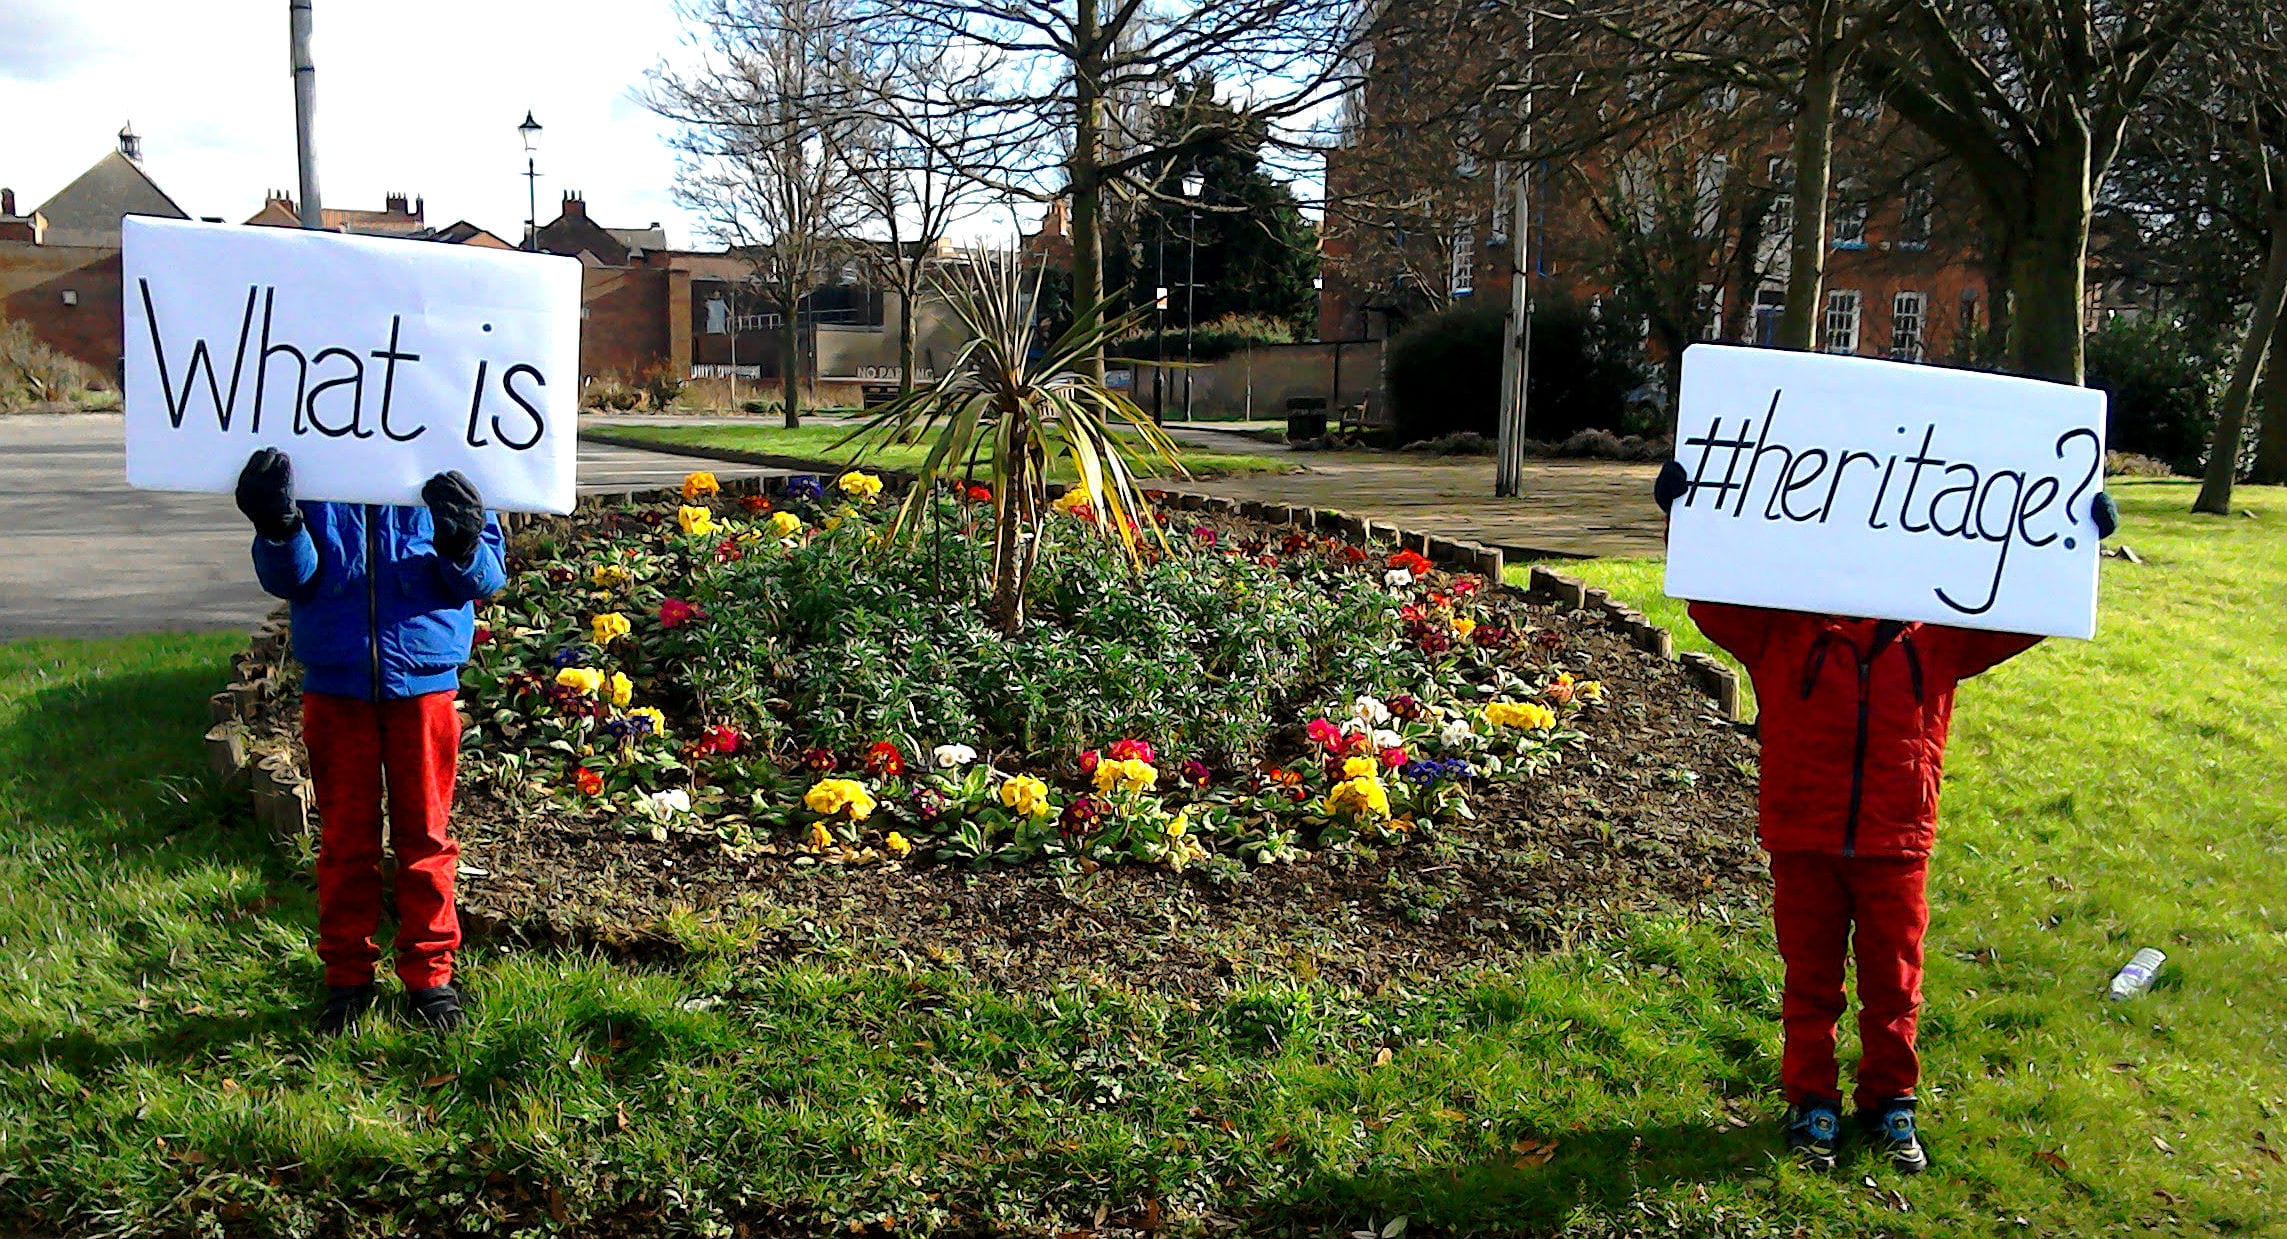 Is this #heritage? A civic flower display in Gainsborough.